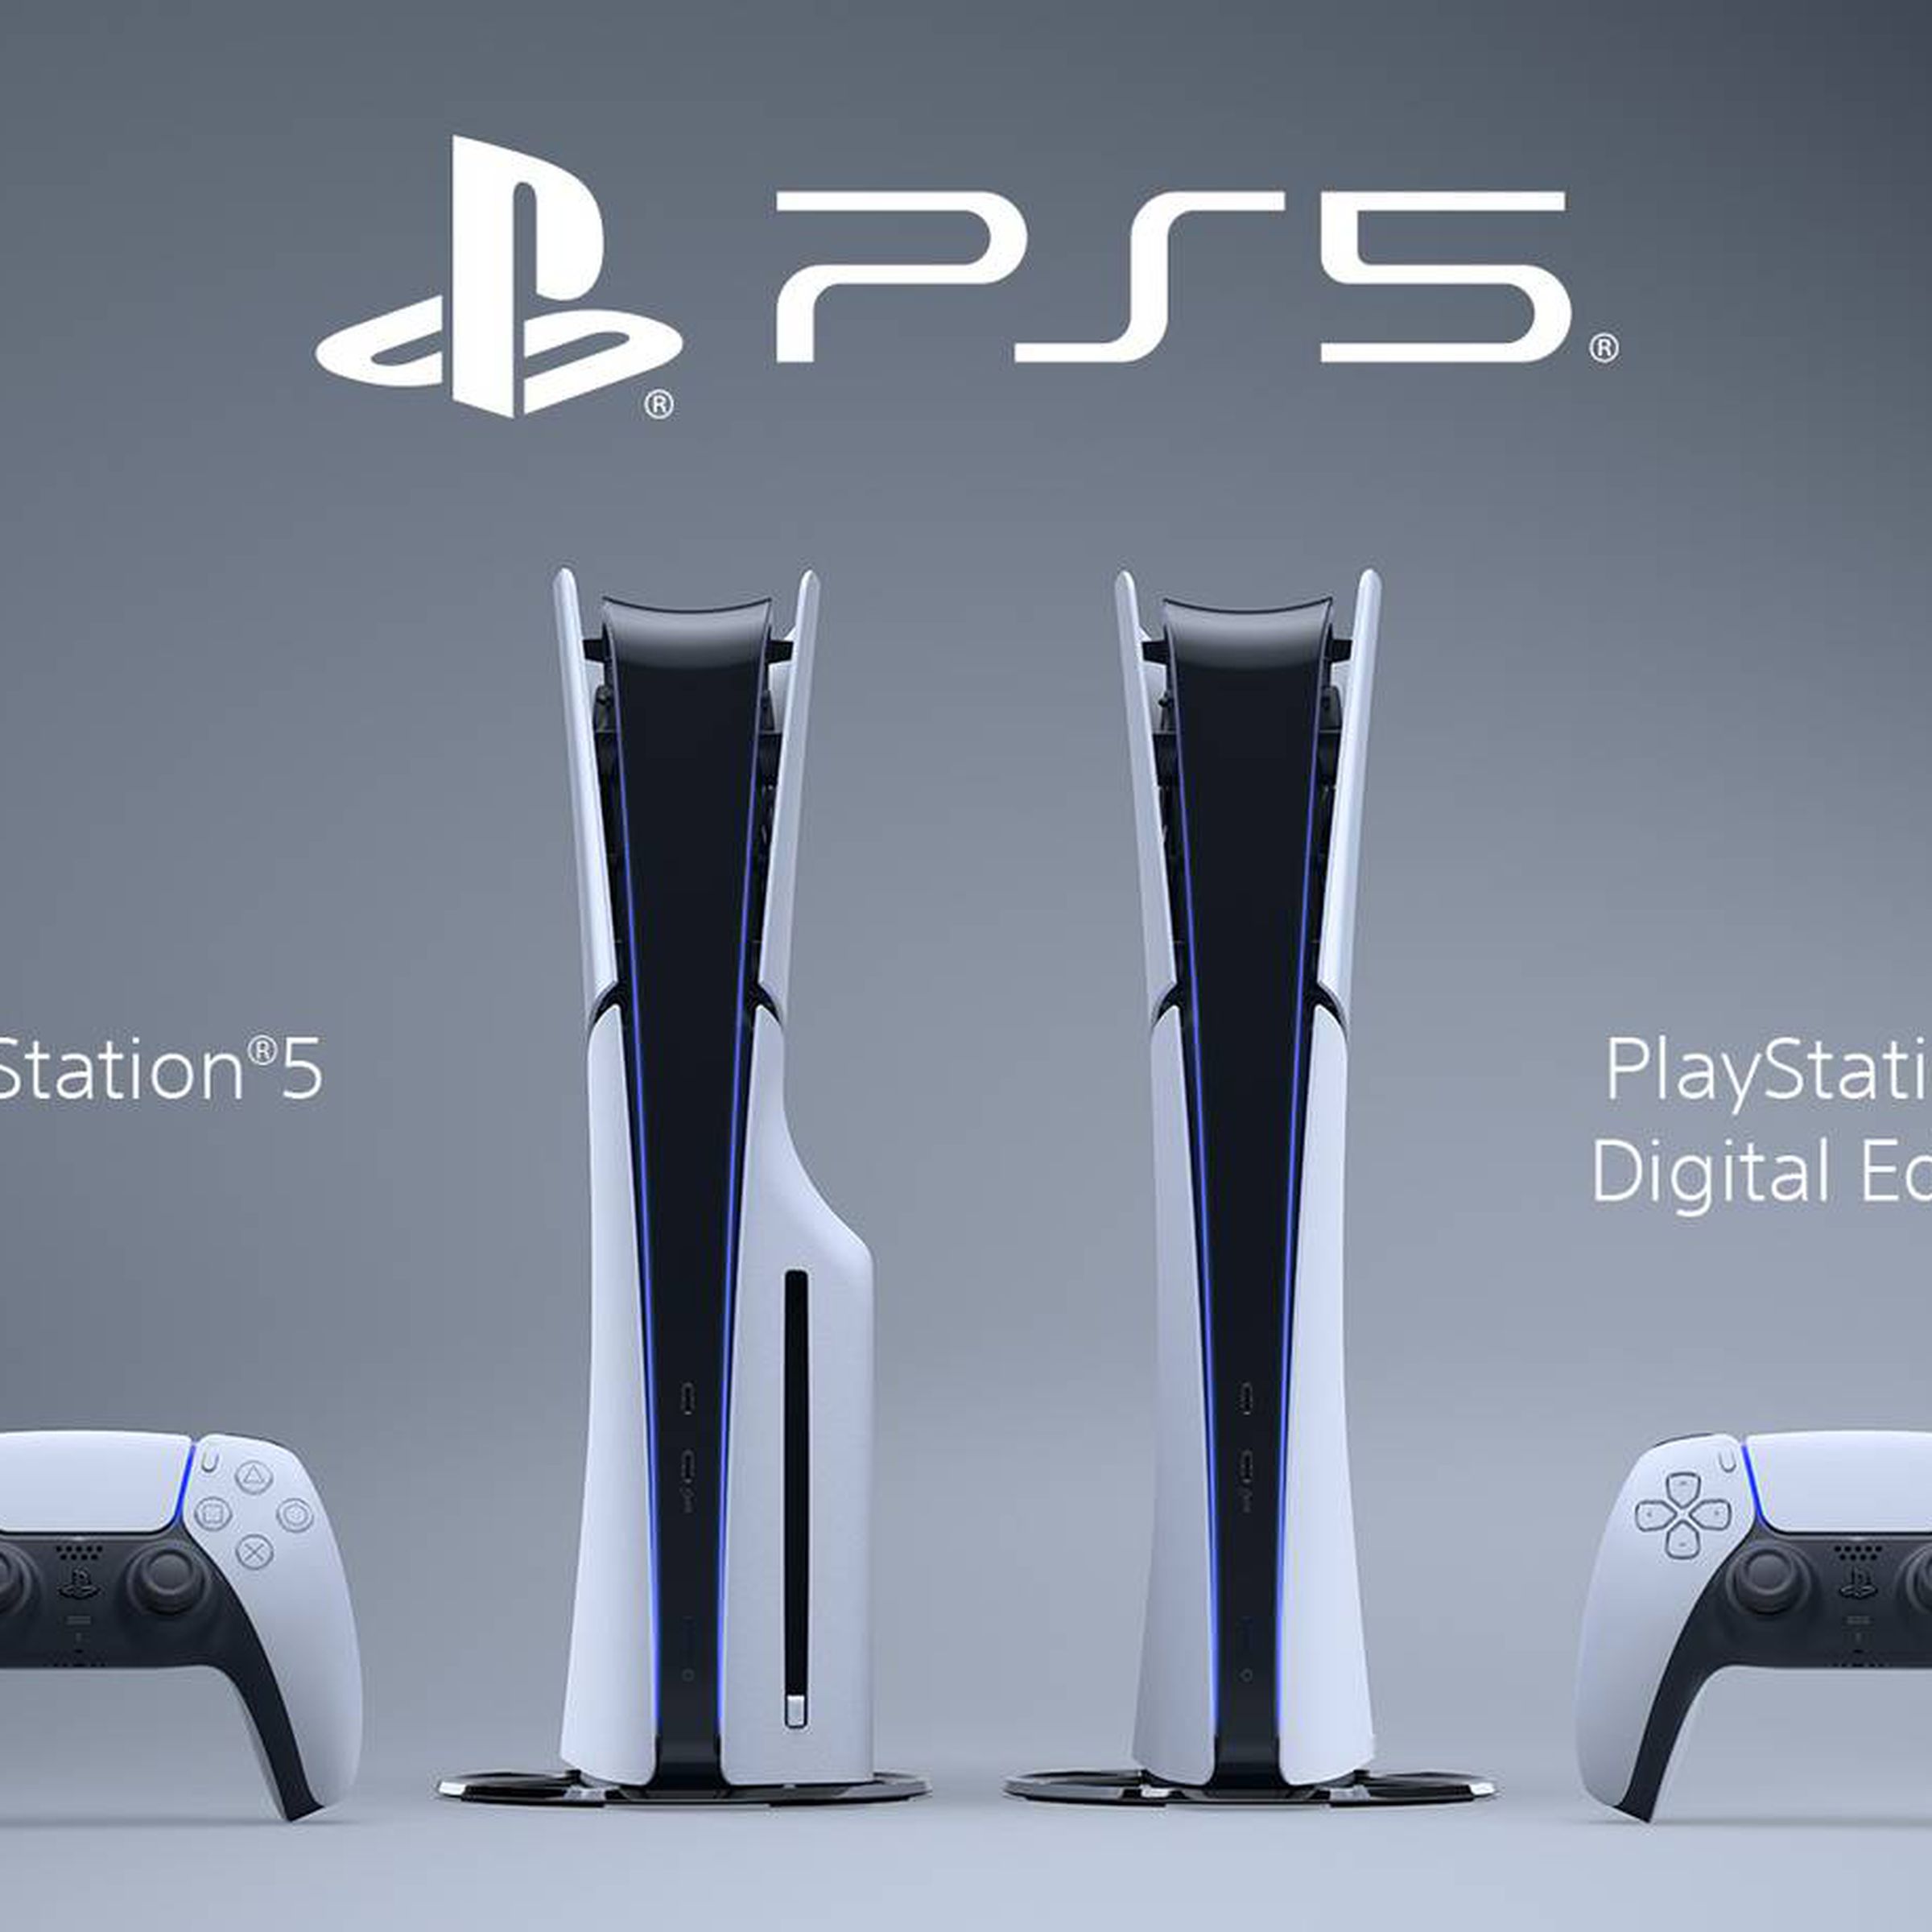 An image of the new PS5 models. On the left, the disc drive version, on the right, the digital version.